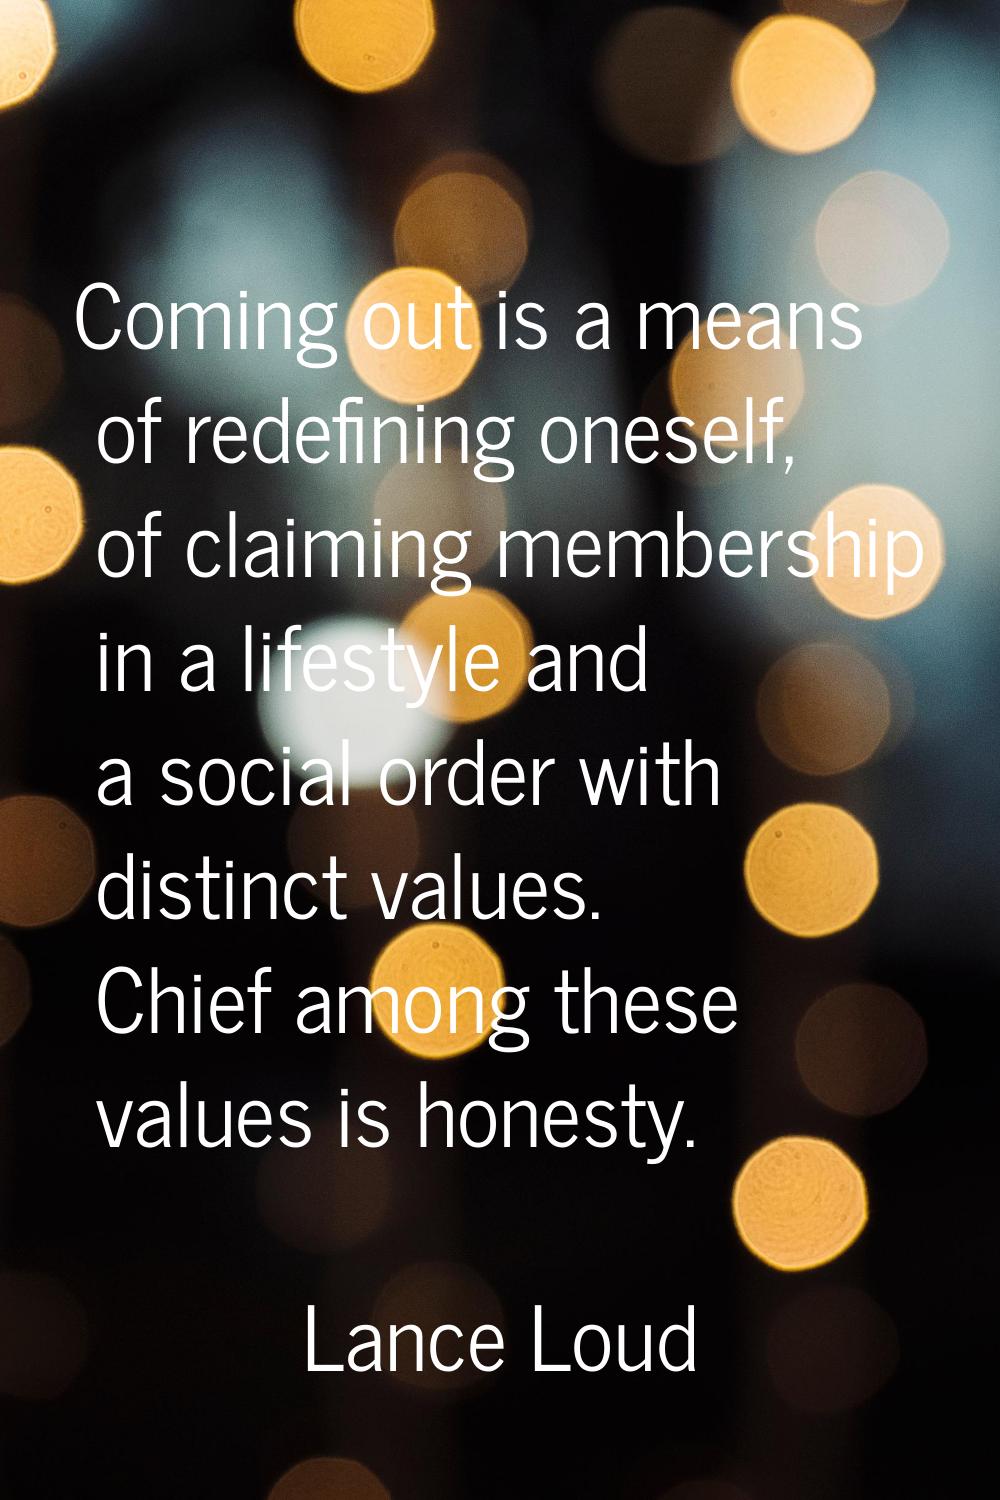 Coming out is a means of redefining oneself, of claiming membership in a lifestyle and a social ord